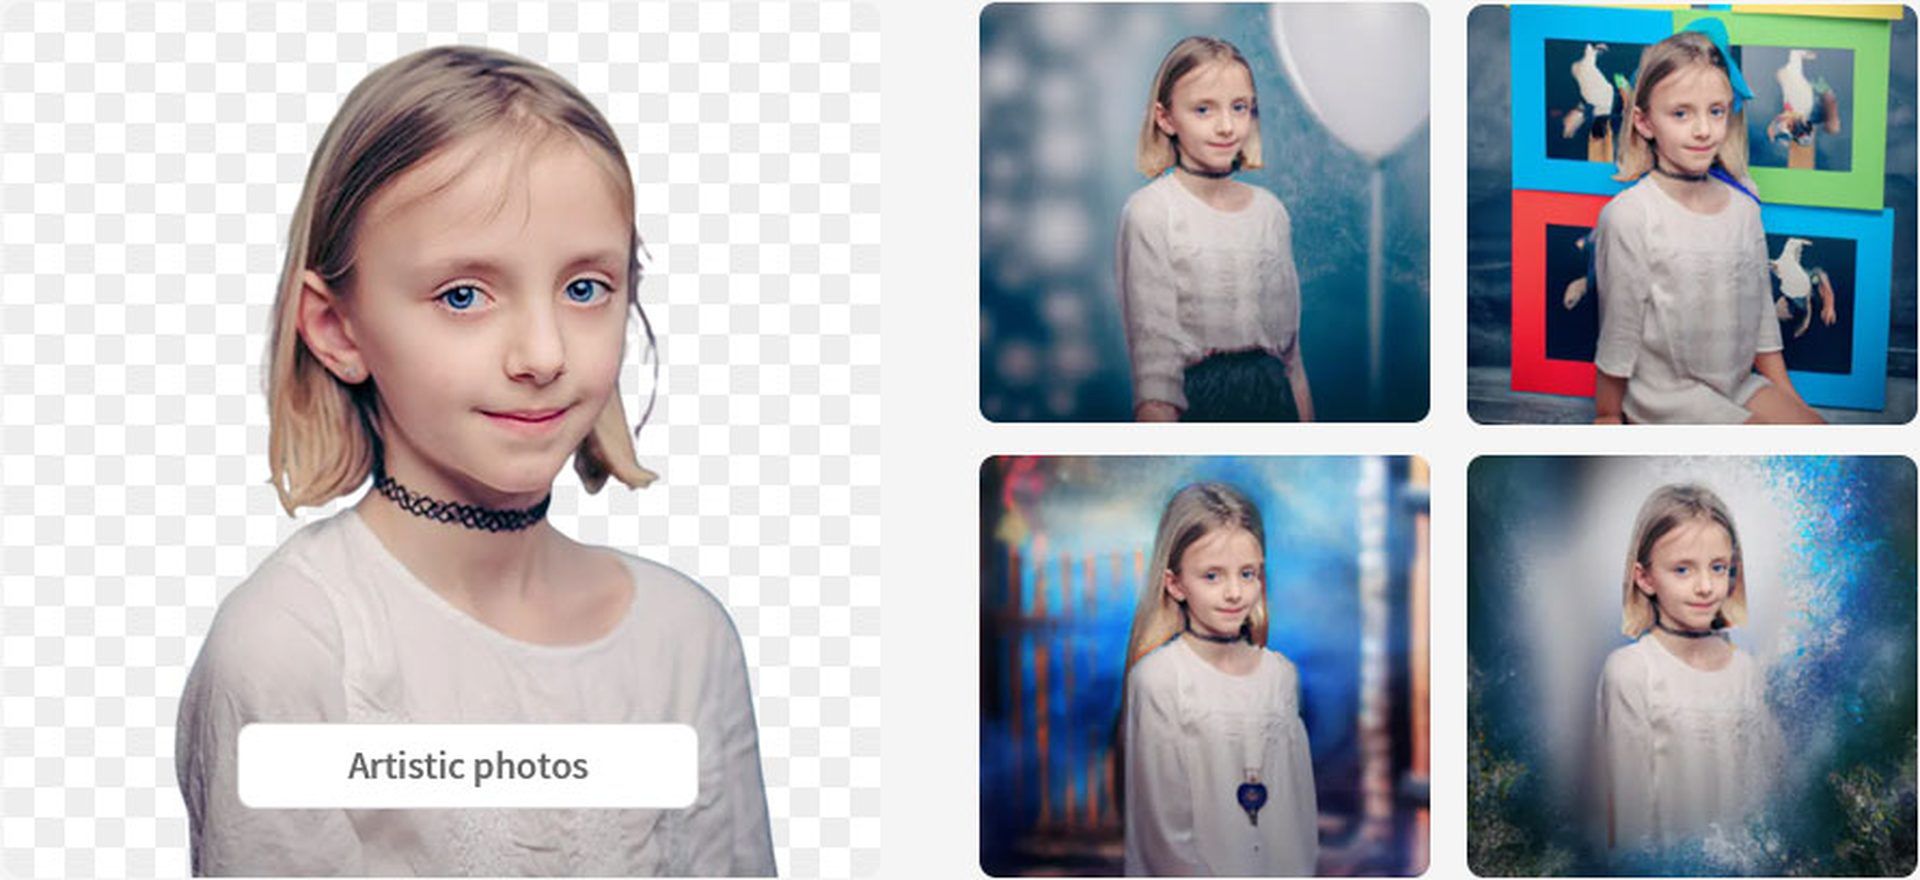 Check out the best AI Photo Editors free, online, and more features tailored to your needs! Learn how to use them and improve your images. 